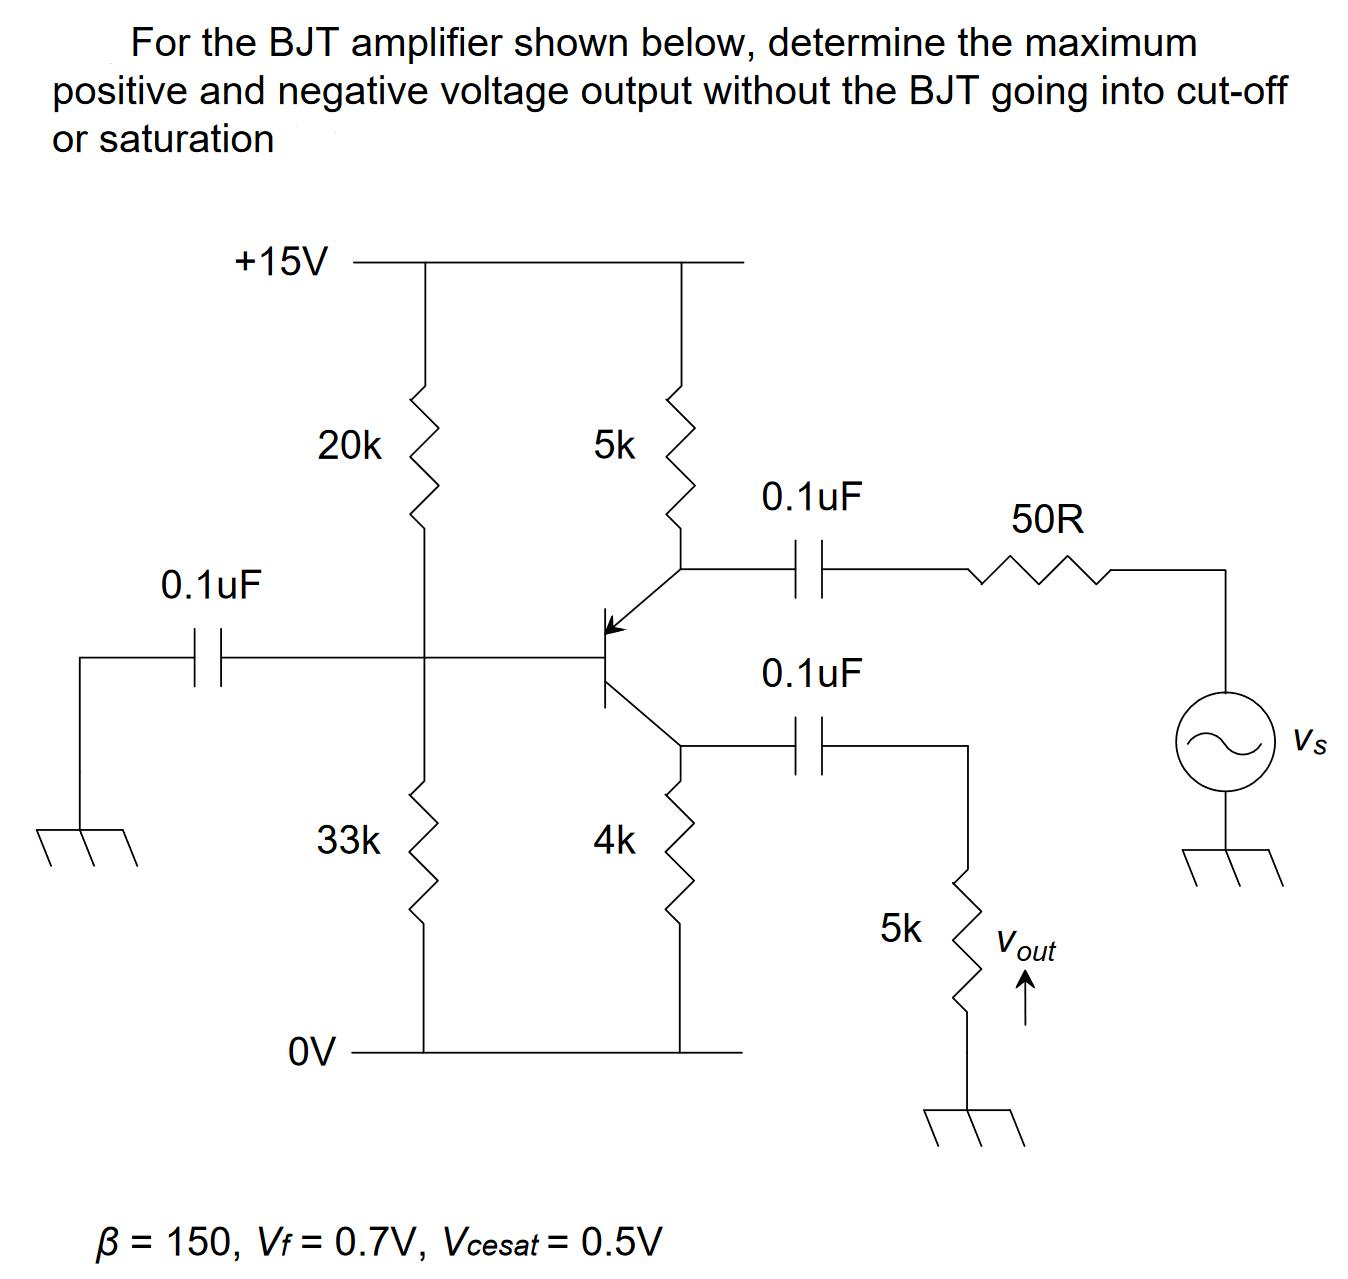 For the BJT amplifier shown below, determine the maximum positive and negative voltage output without the BJT